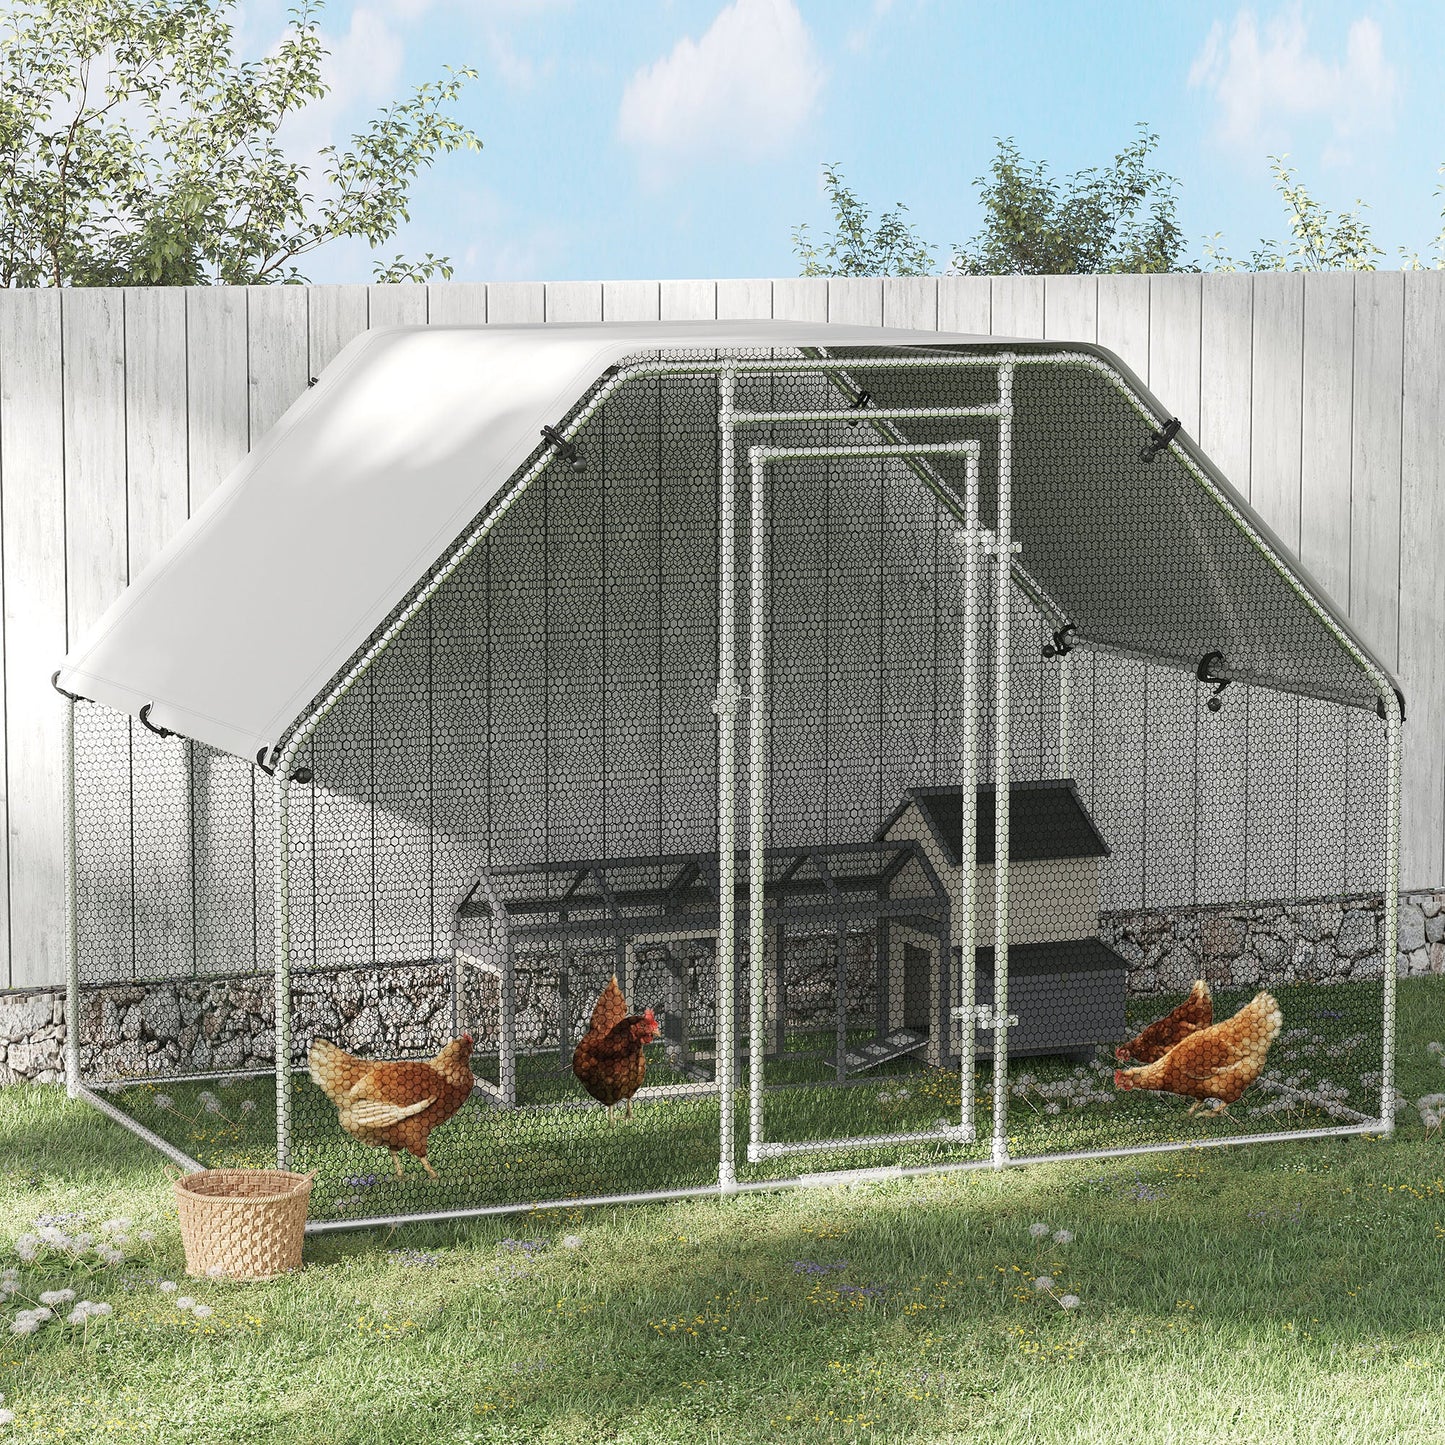 9.2' x 6.3' Metal Chicken Coop, Galvanized Walk-in Hen House, Poultry Cage Outdoor Backyard with Waterproof UV-Protection Cover for Rabbits, Ducks at Gallery Canada